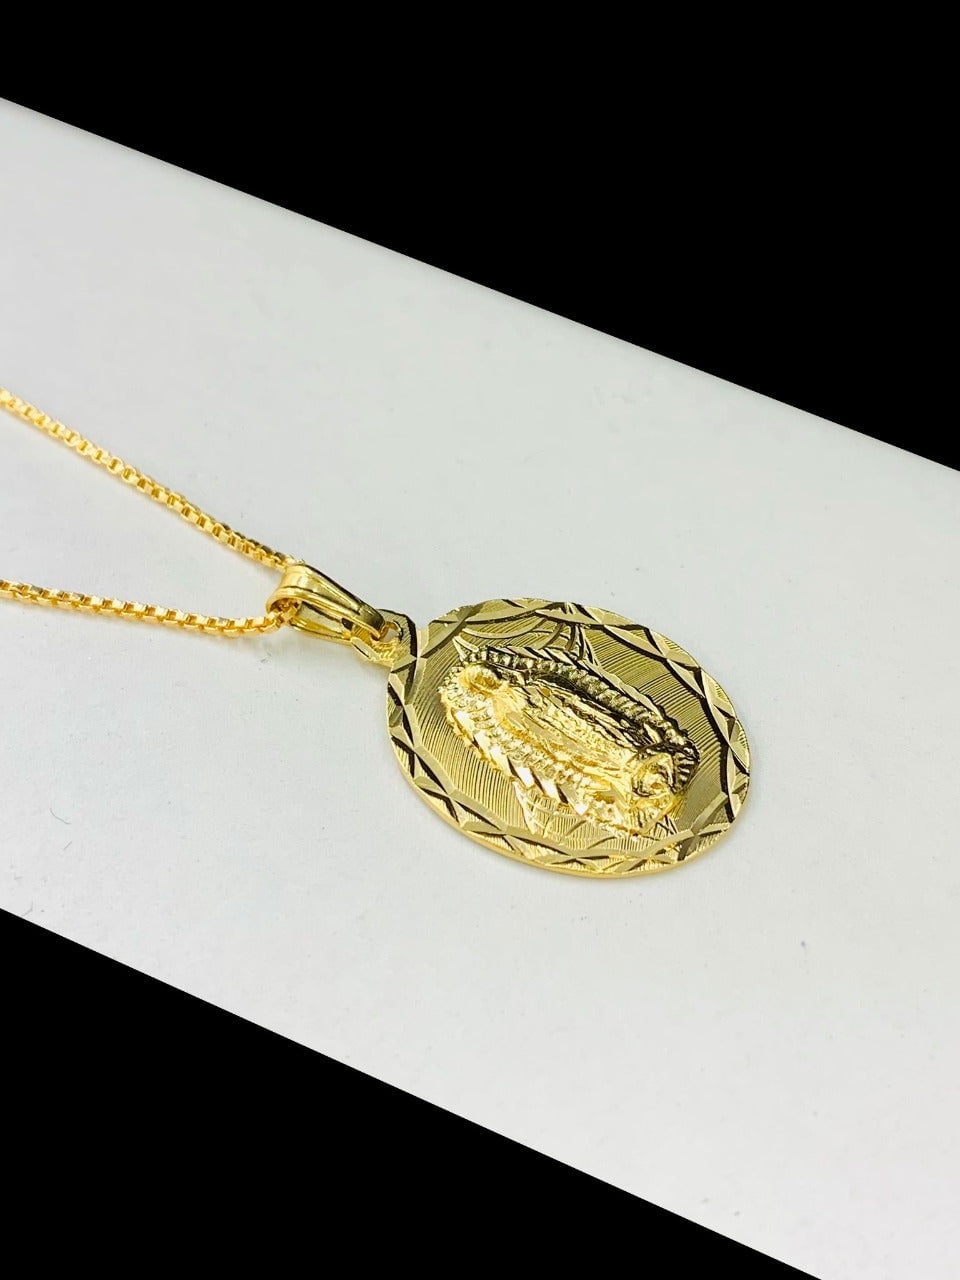 Our Lady of Guadalupe Gold Necklace. Gold Filled. Virgen De Guadalupe Cadena  De Oro Laminado. Gold. Gold Plated Jewerly. Joyeria De Oro -  Israel